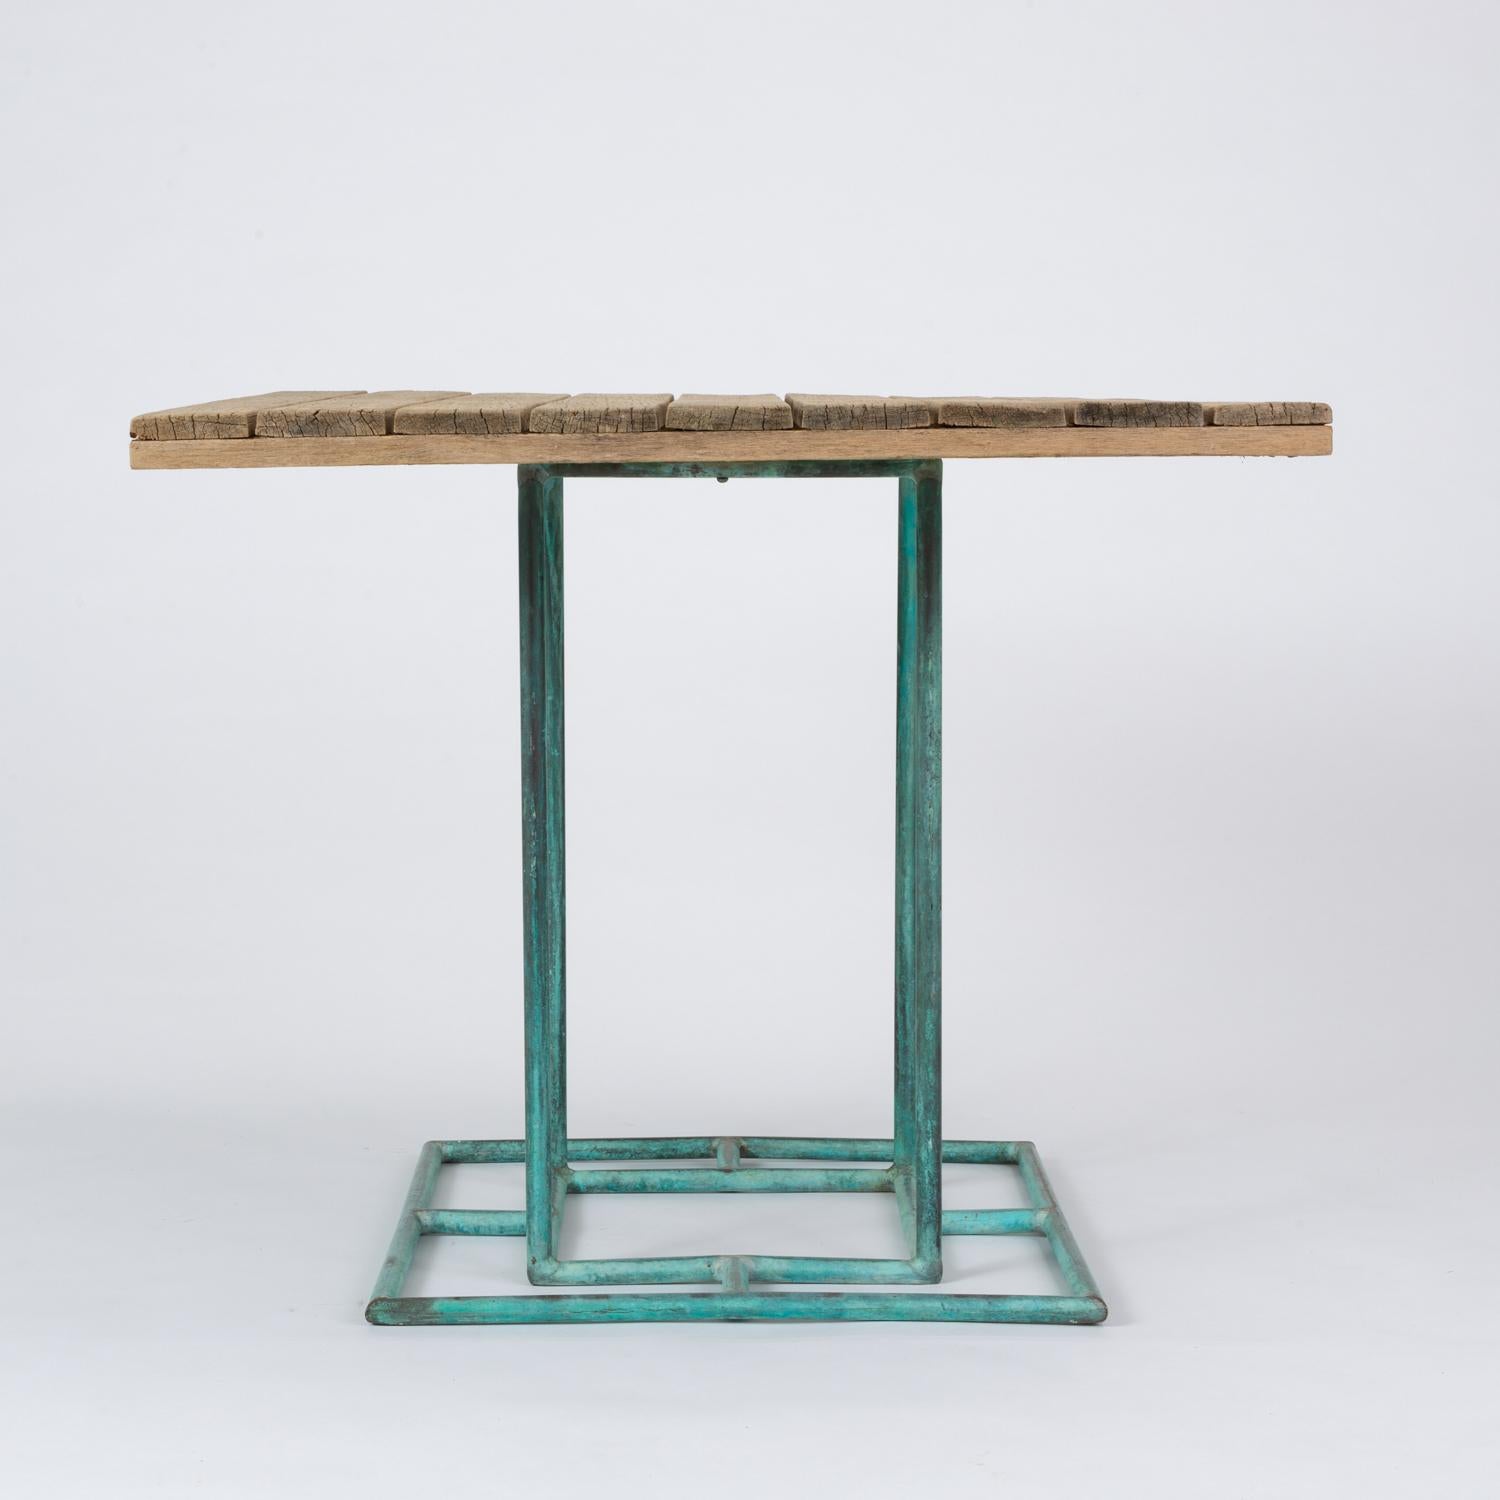 American Bronze Patio Dining Table with Square Wooden Top by Walter Lamb for Brown Jordan